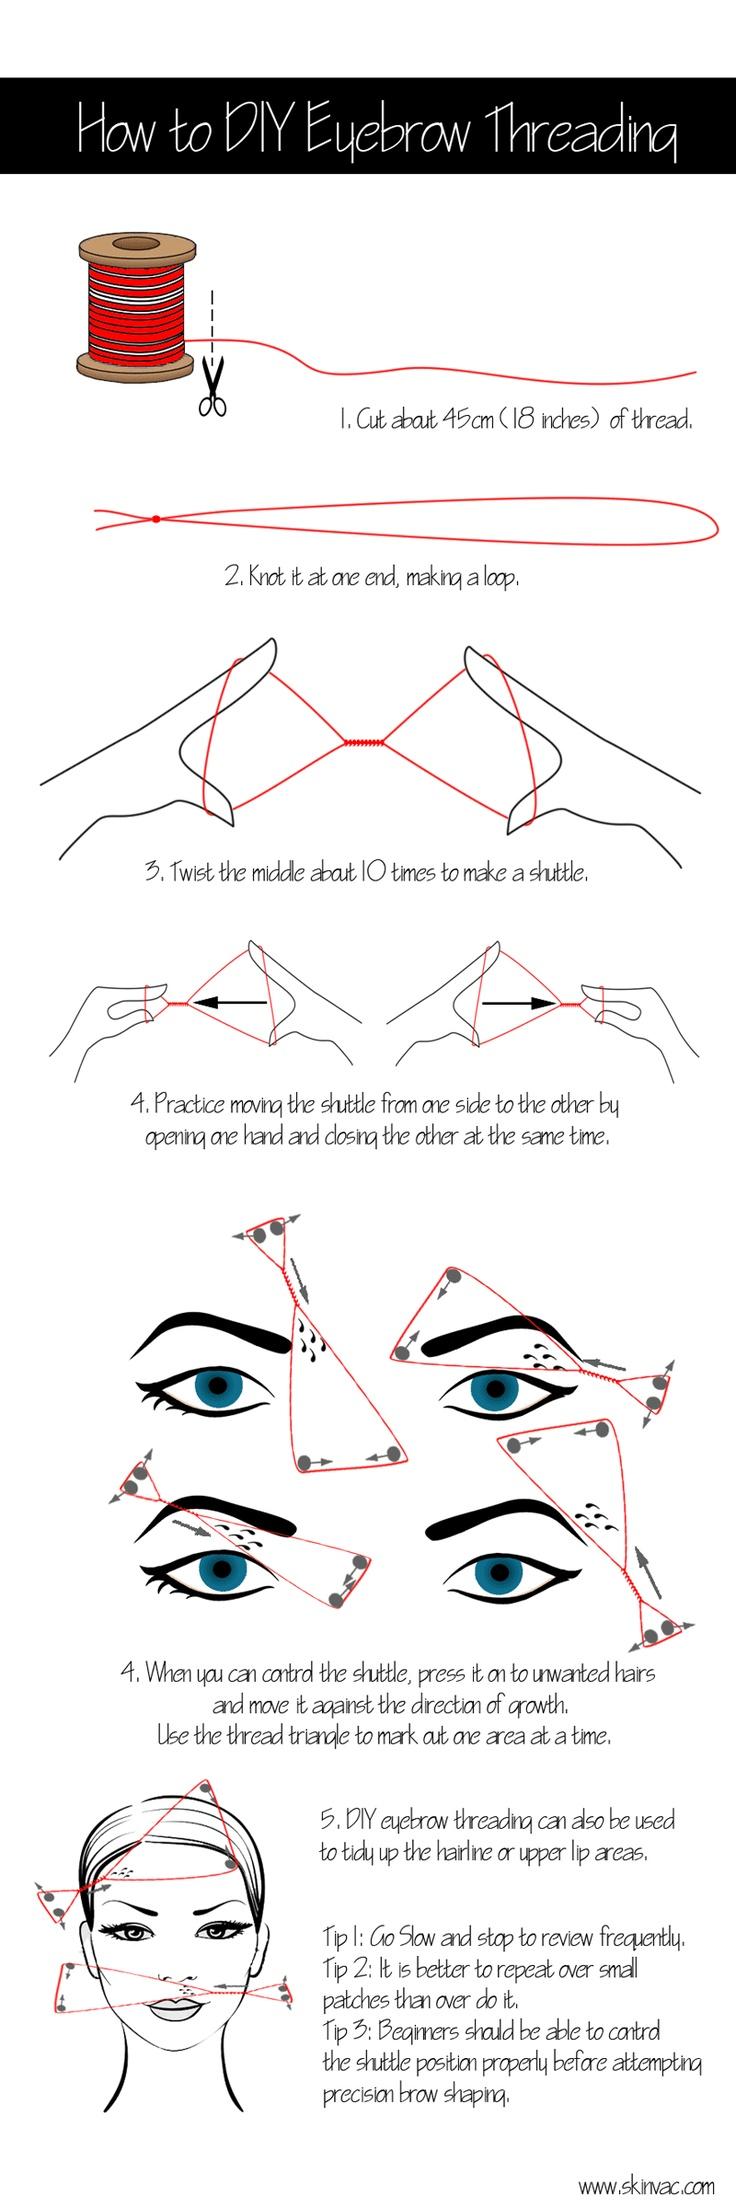 Wedding - How To Do Eye Brow Threading By Yourself 